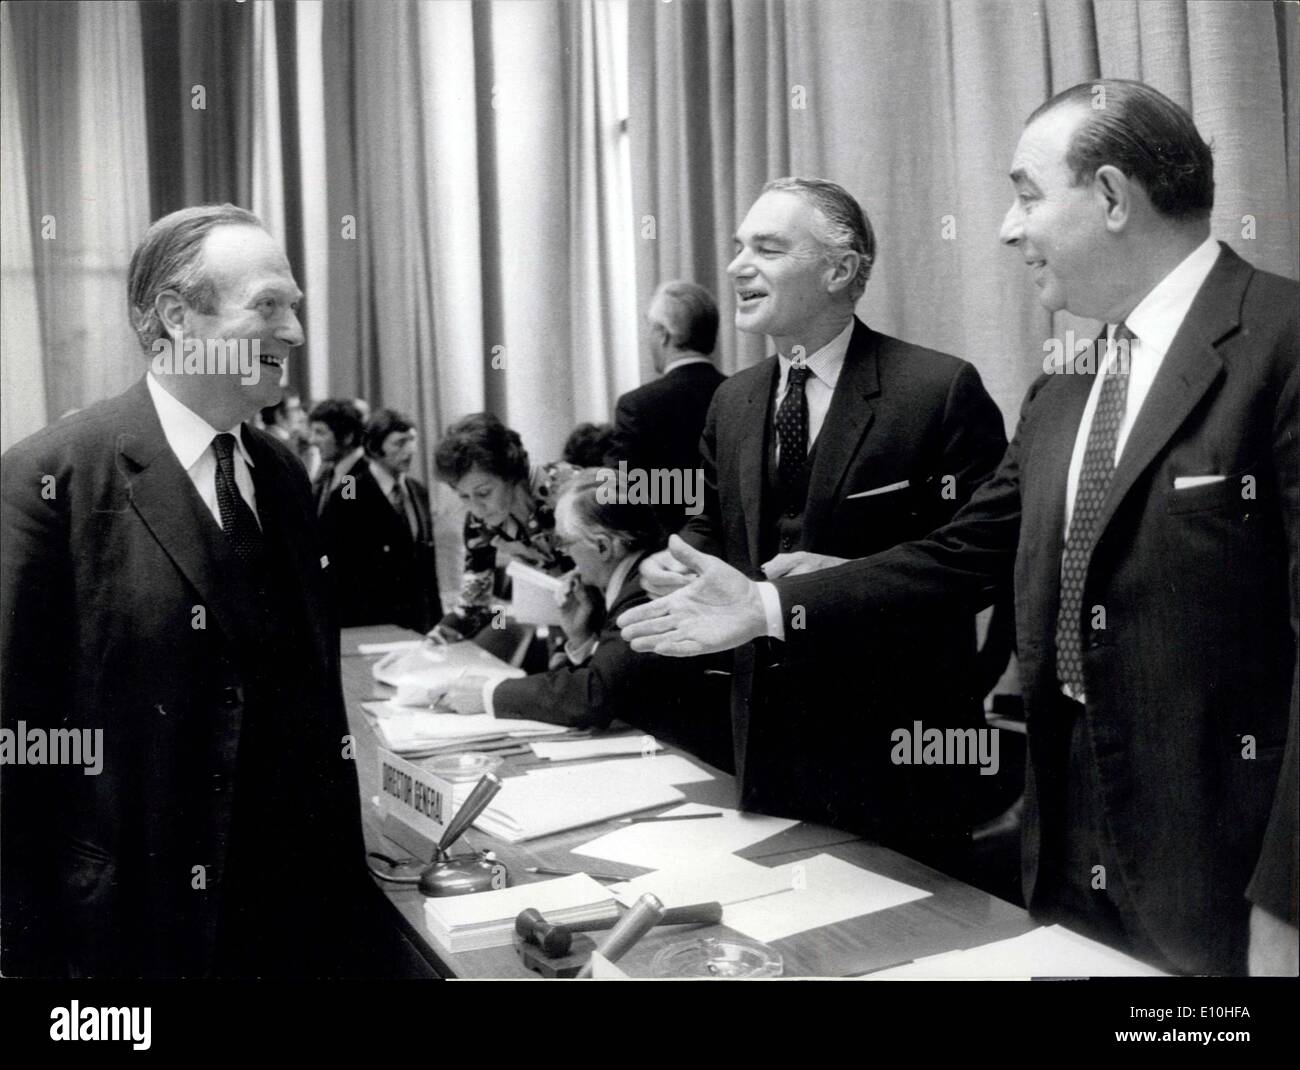 Nov. 14, 1972 - 26th Gatt-Session Closed: The General Agreement on Tariffs and Trade (GATT) closed Tuesday its 26th regular session after two weeks of intense negotiating work. Photo shows Swiss delegate, ambassador Jolles (left) takes leave of the president of the Gatt, Olivier Long, and the session's chairman, the Italian Smoquina (f.l.t.r.) at the Gatt-hall in Geneva. Stock Photo